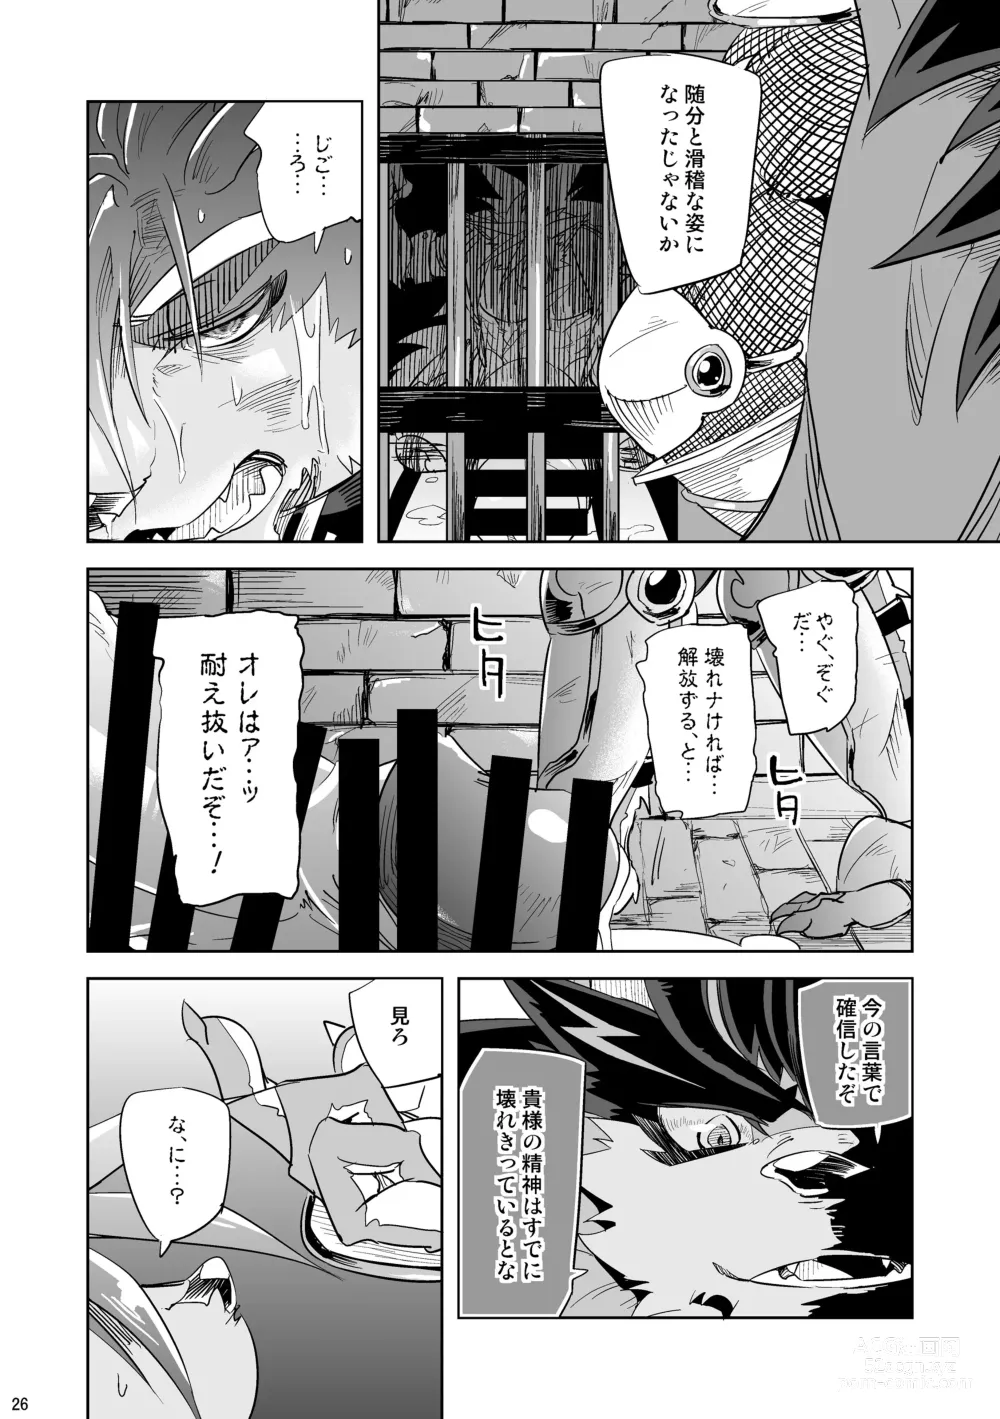 Page 26 of doujinshi Hero in Darkness